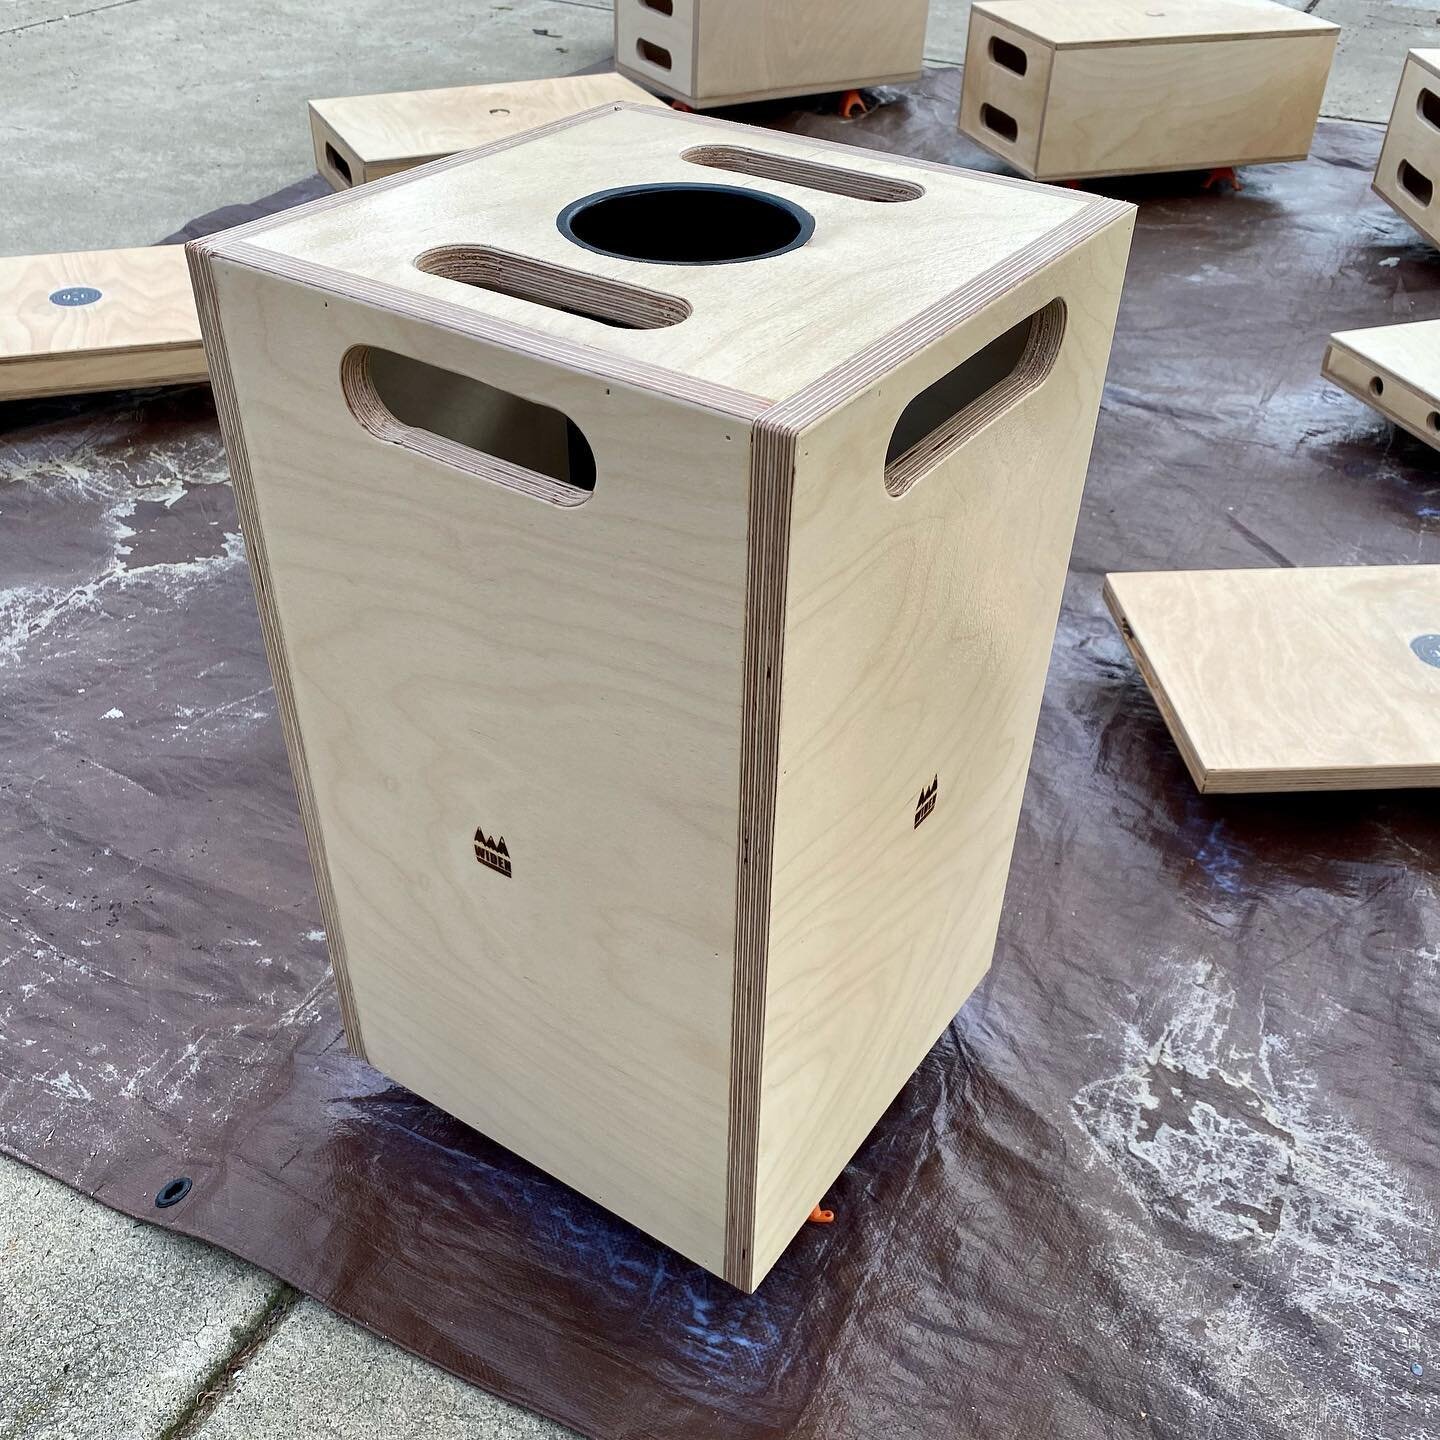 On this latest run of apple boxes I was asked if I could make a &ldquo;boom box,&rdquo; a double wide apple box with a tube down the center to hold a boom pole while on sets. I&rsquo;m fairly happy with how this run came out. @gaffermong @questsandch